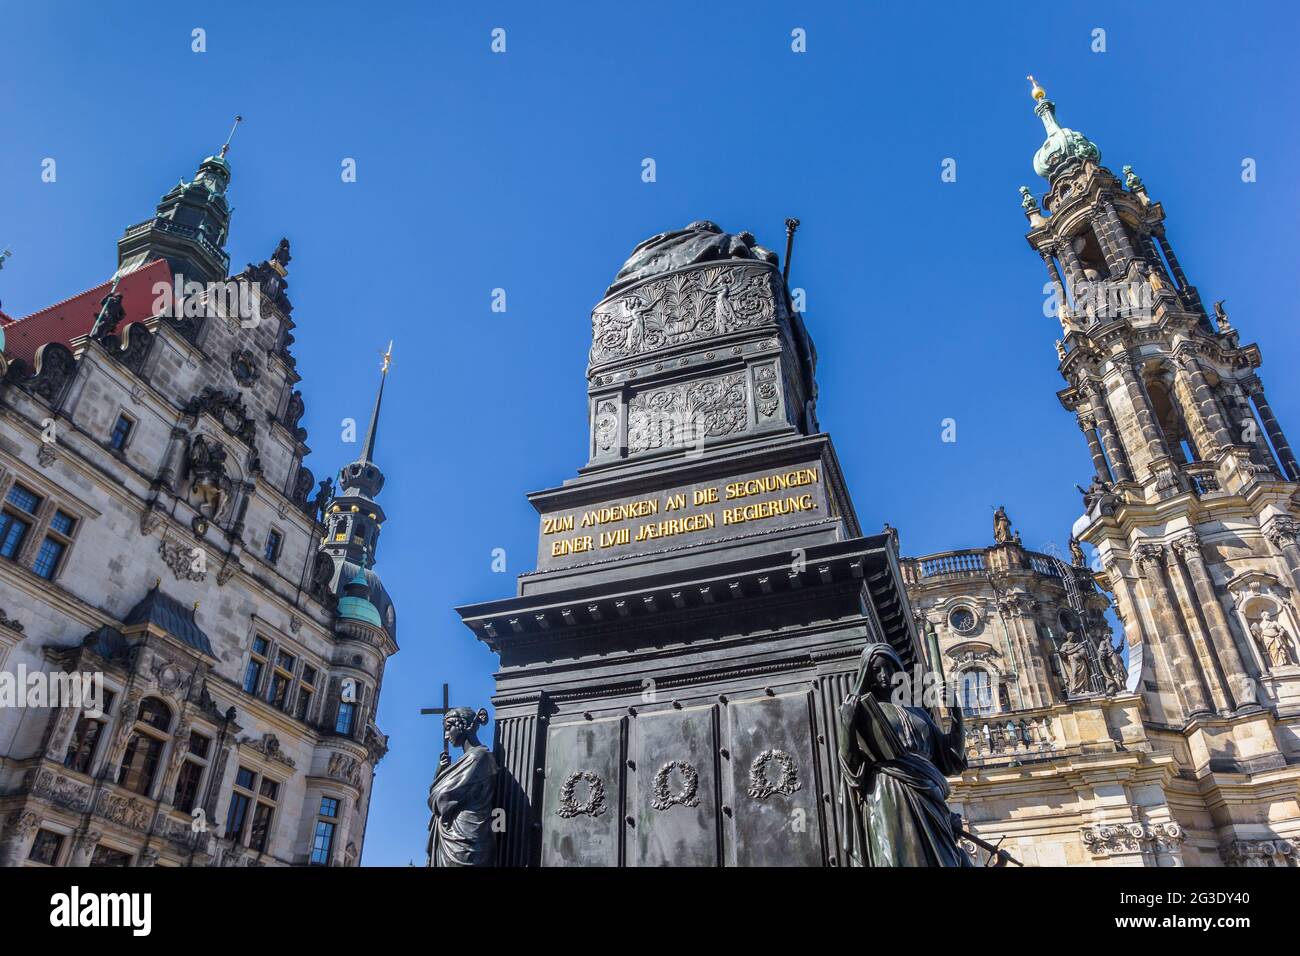 Historic buildings and sculpture on the Schlossplatz square in Dresden, Germany Stock Photo